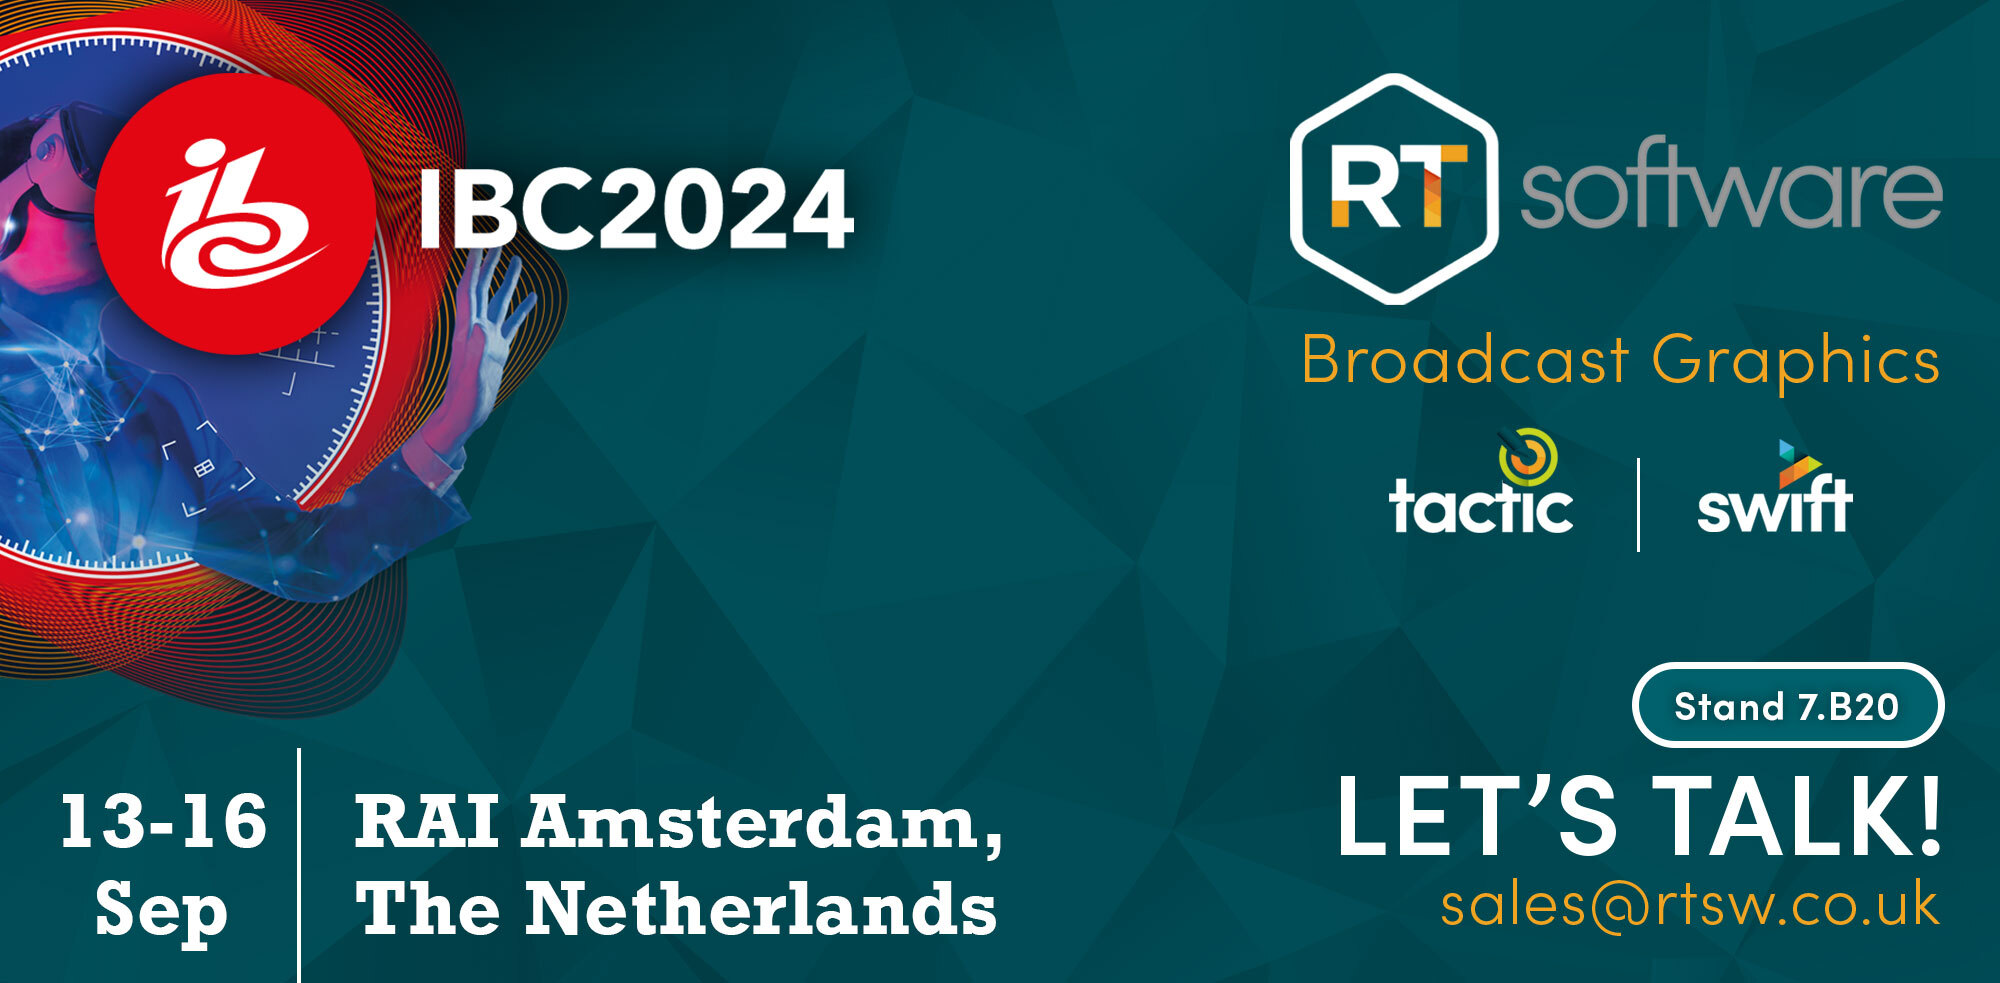 Meet the Broadcast Graphics Experts at IBC 2024